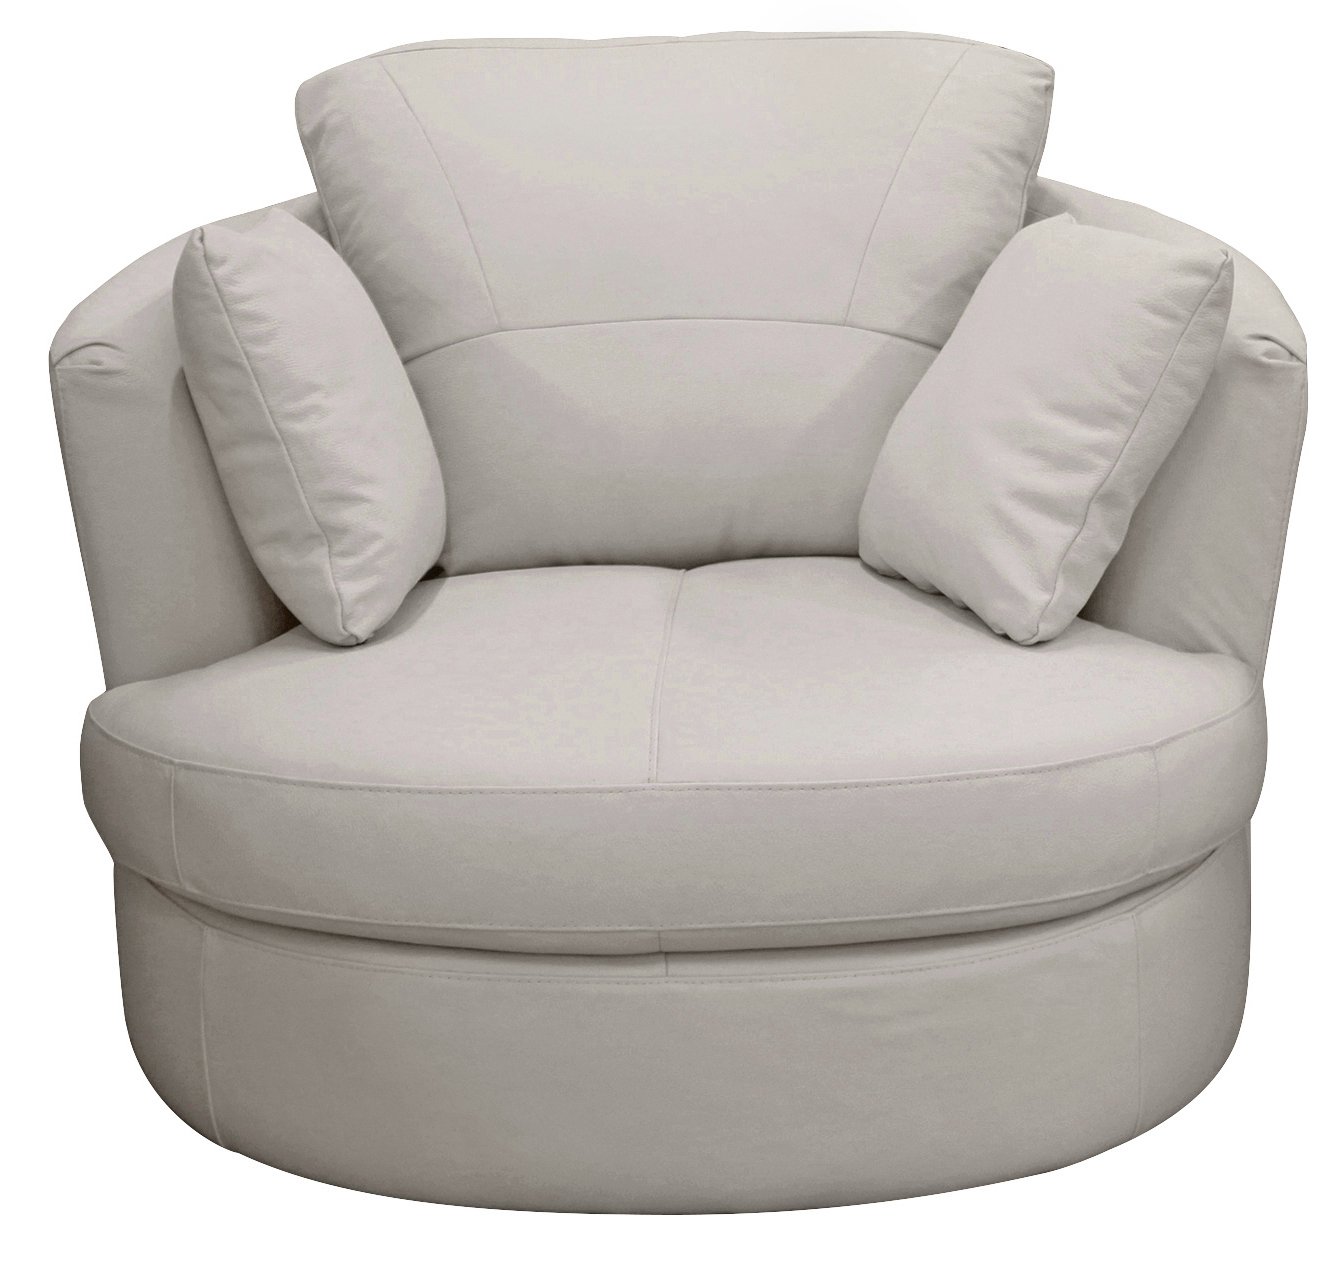 Argos Home Milano Leather Swivel Chair review